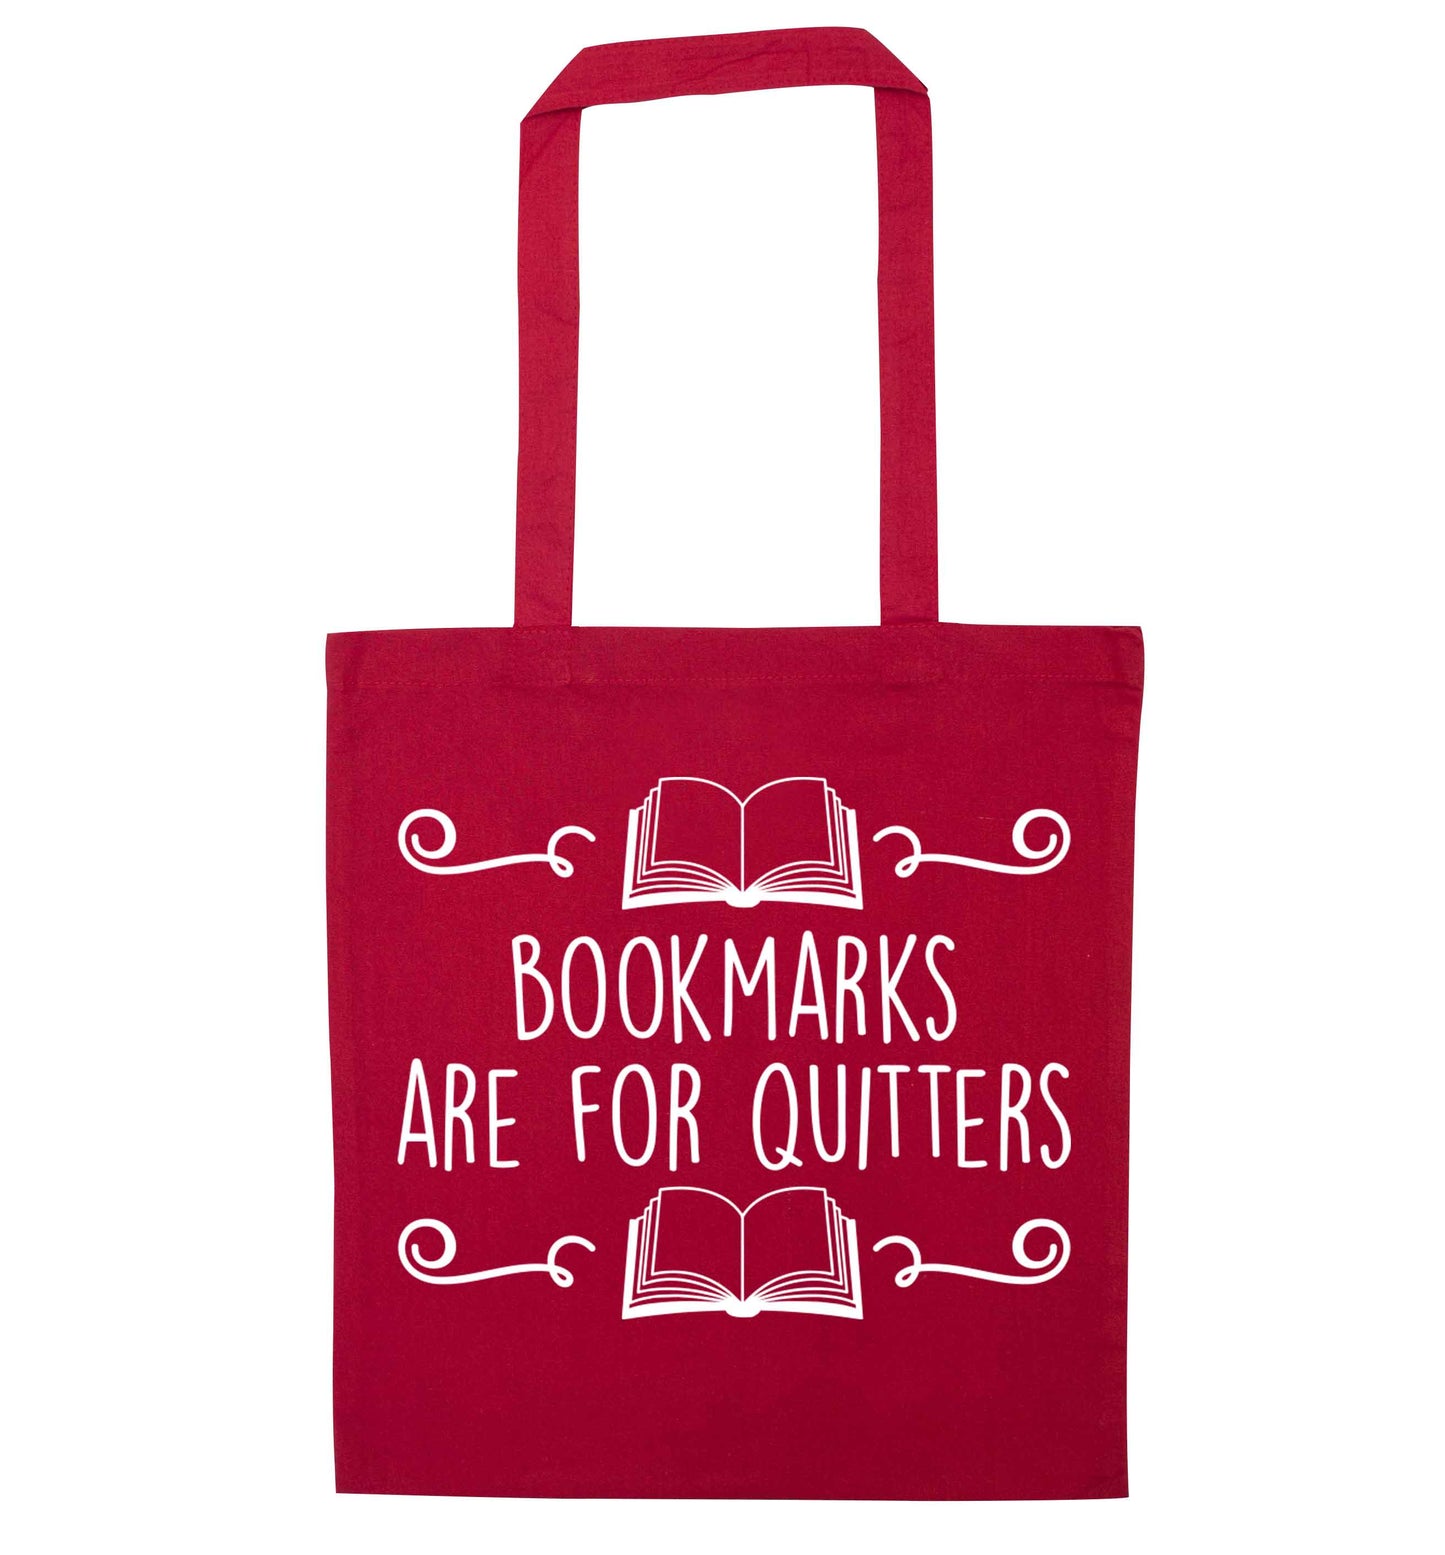 Bookmarks are for quitters red tote bag